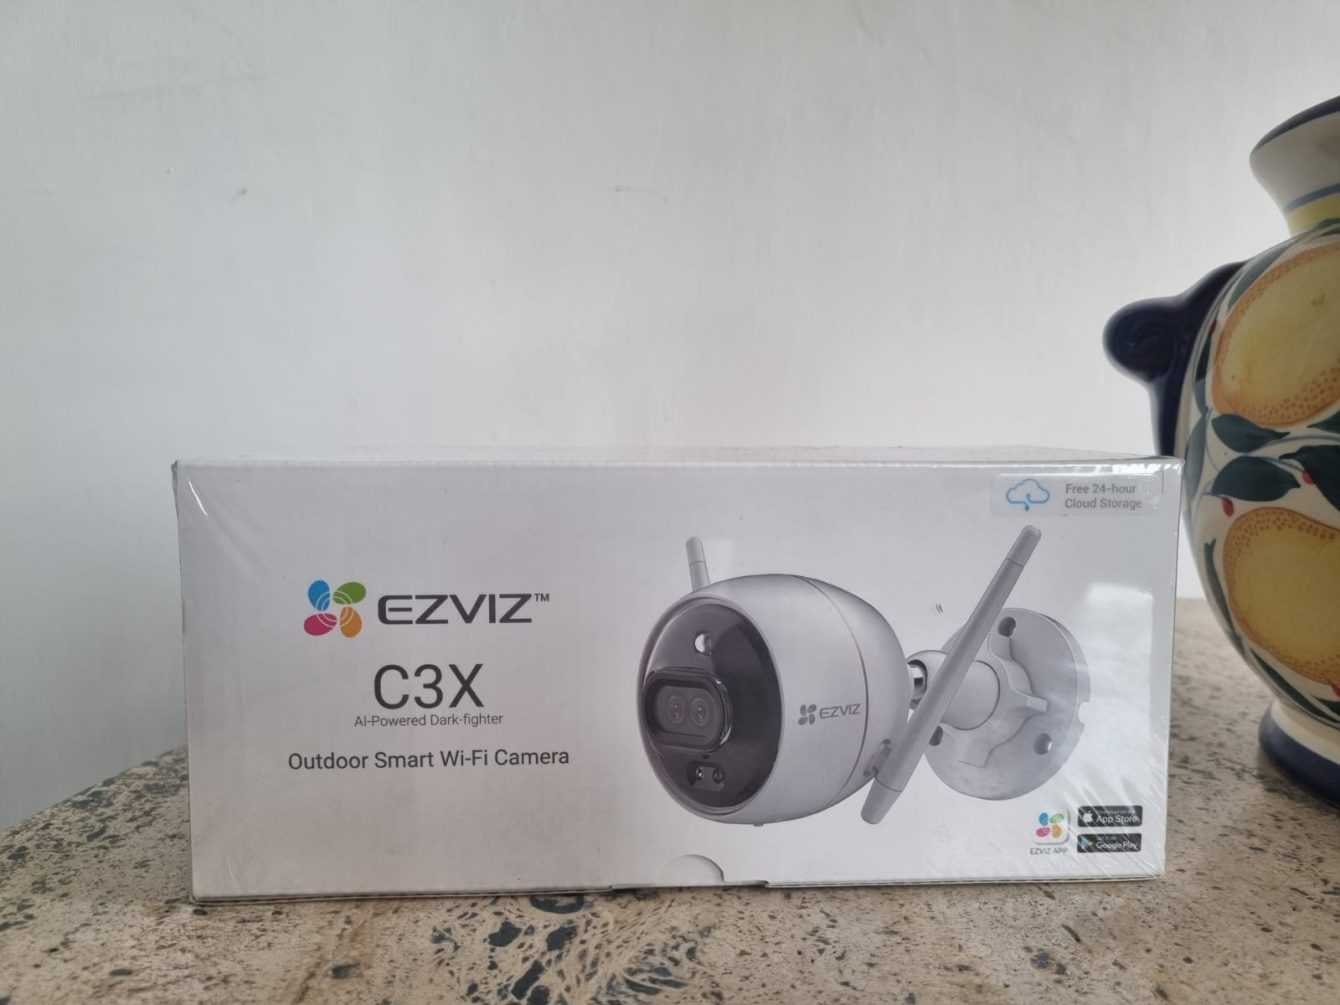 EZVIZ C3X camera review: a great "work" both day and night